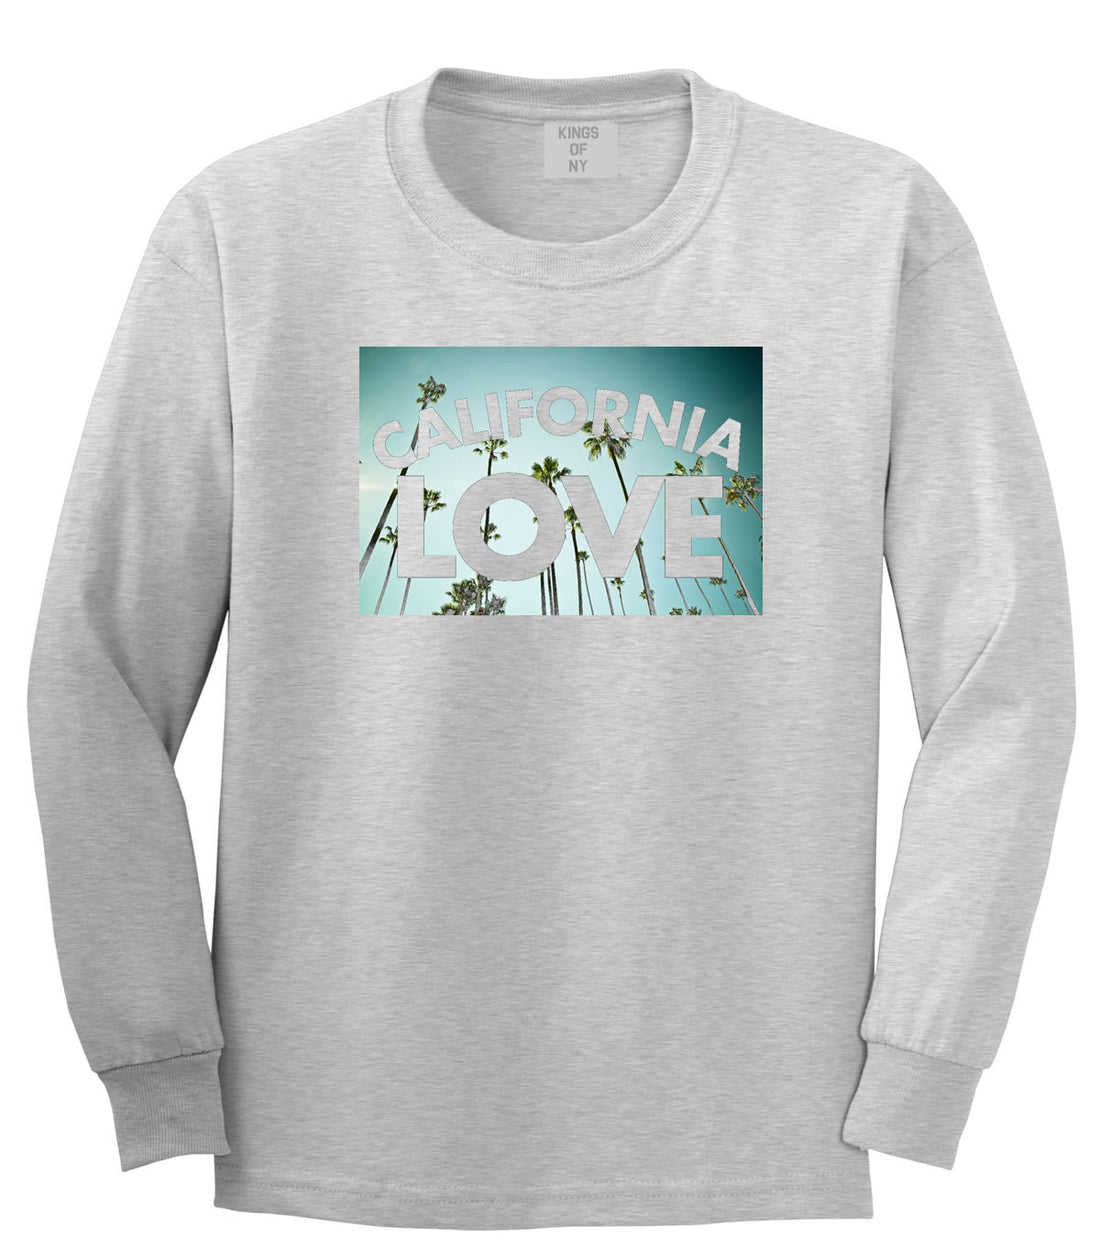 California Love Cali Palm Trees Long Sleeve T-Shirt in Grey By Kings Of NY